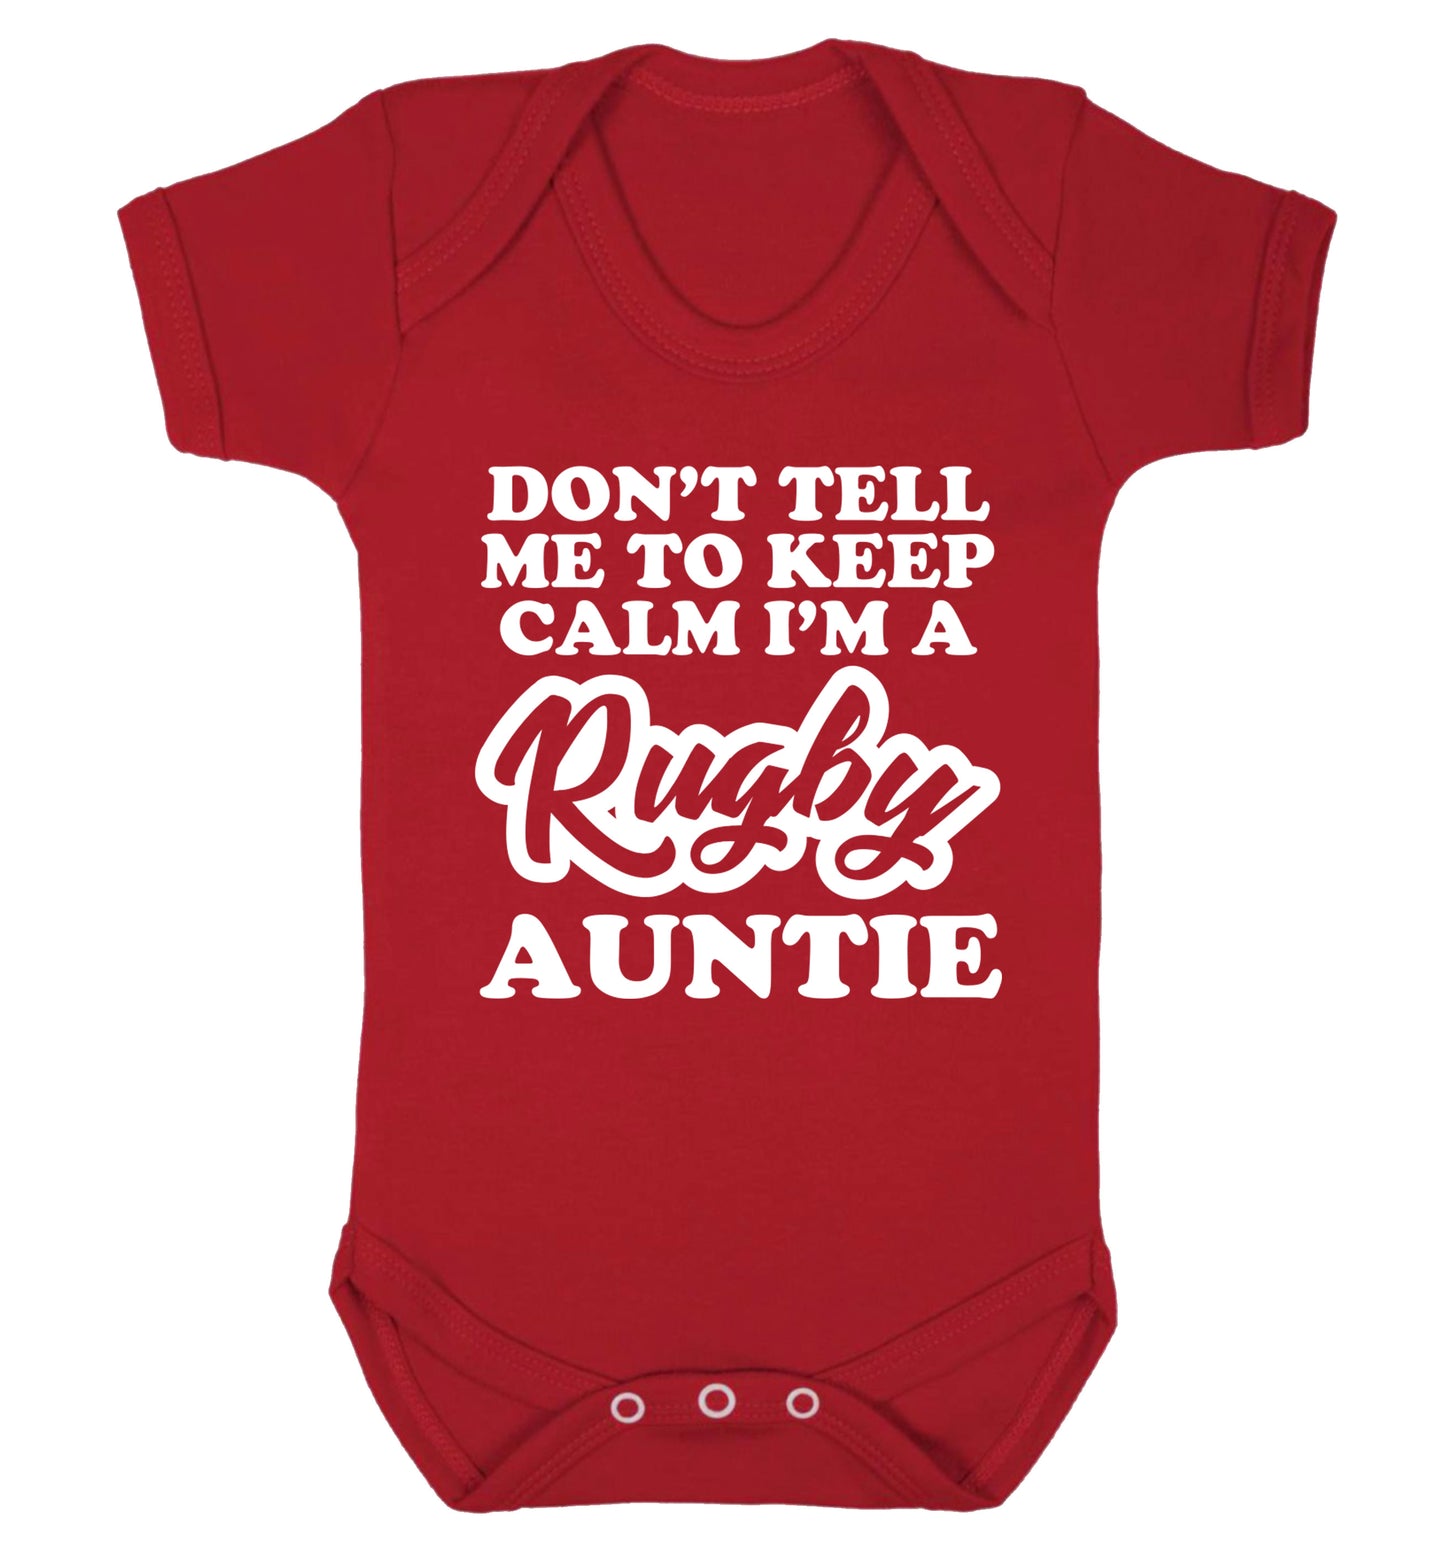 Don't tell me keep calm I'm a rugby auntie Baby Vest red 18-24 months